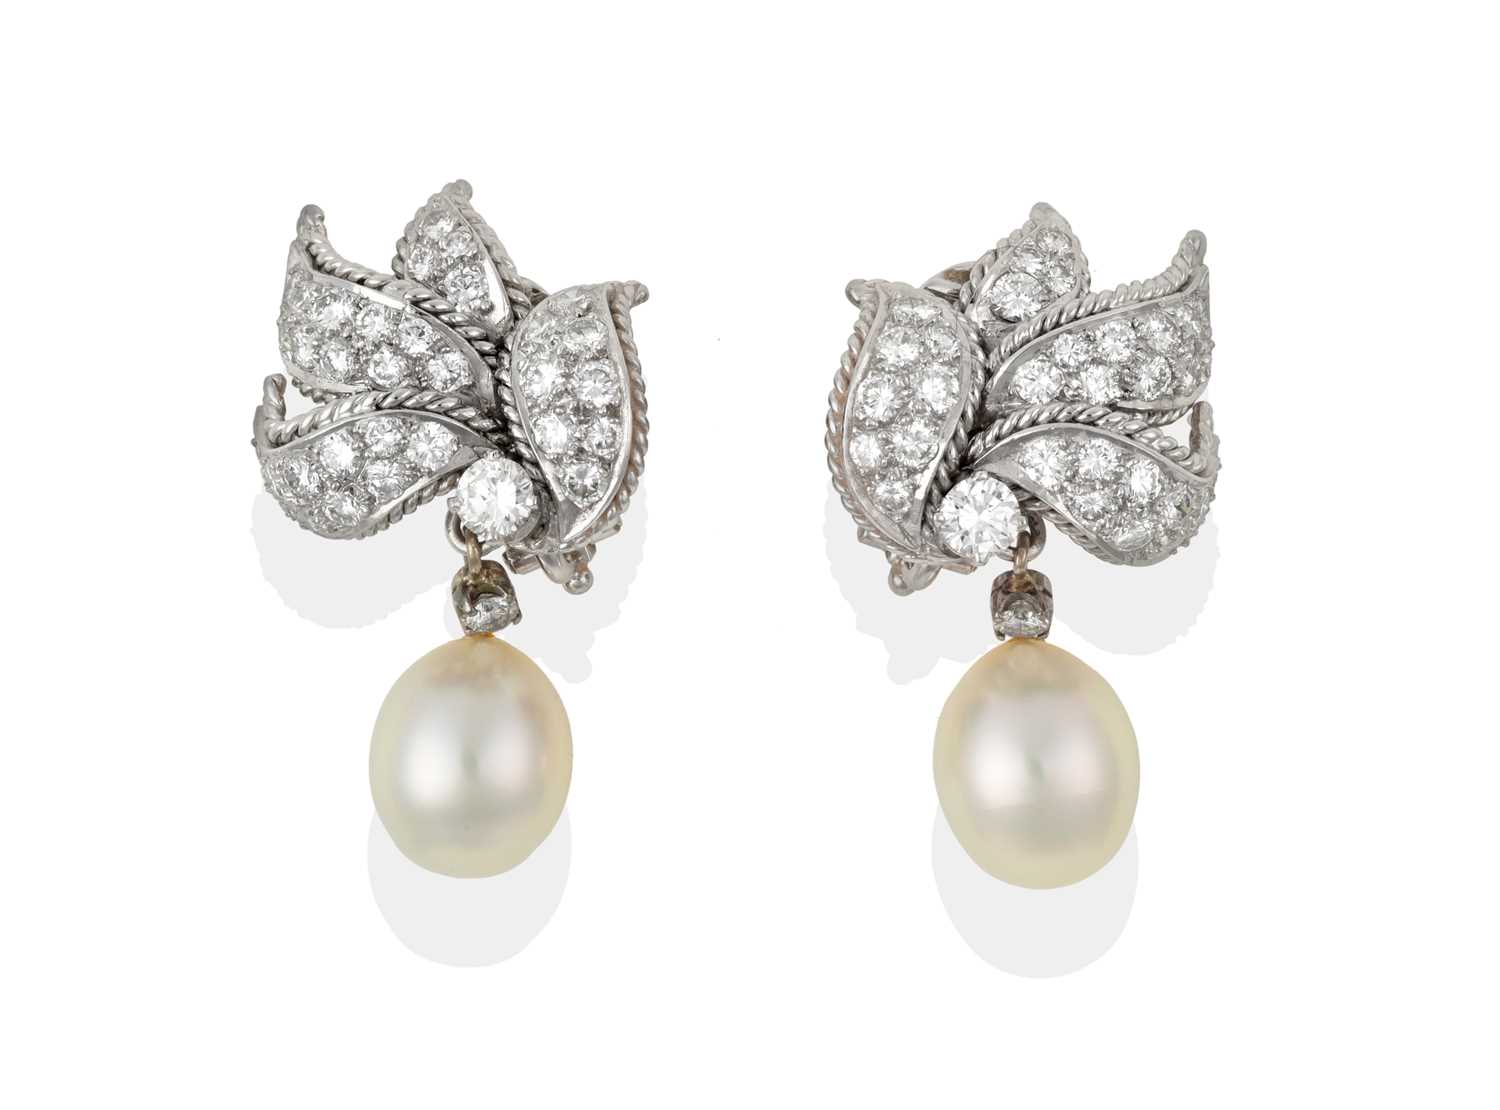 Lot 2040 - A Pair of Diamond and Cultured Pearl Earrings